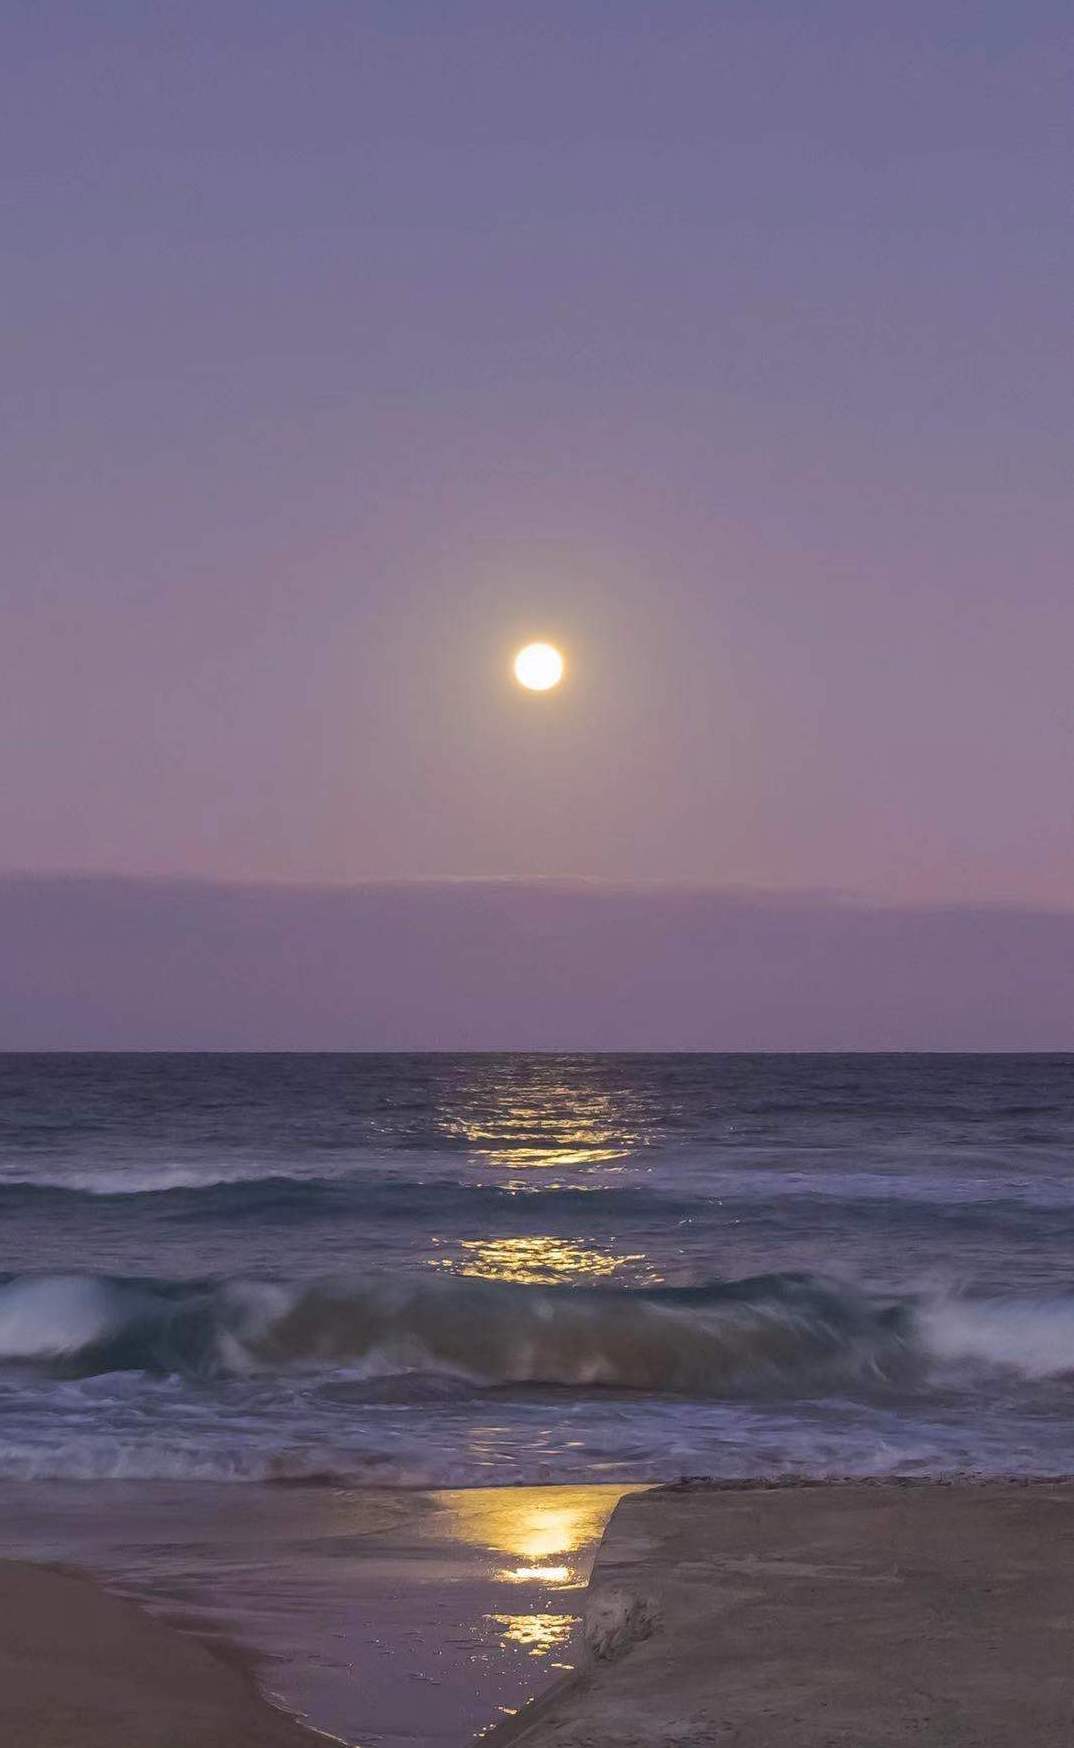 moon and purple sunset reflected on the ocean water